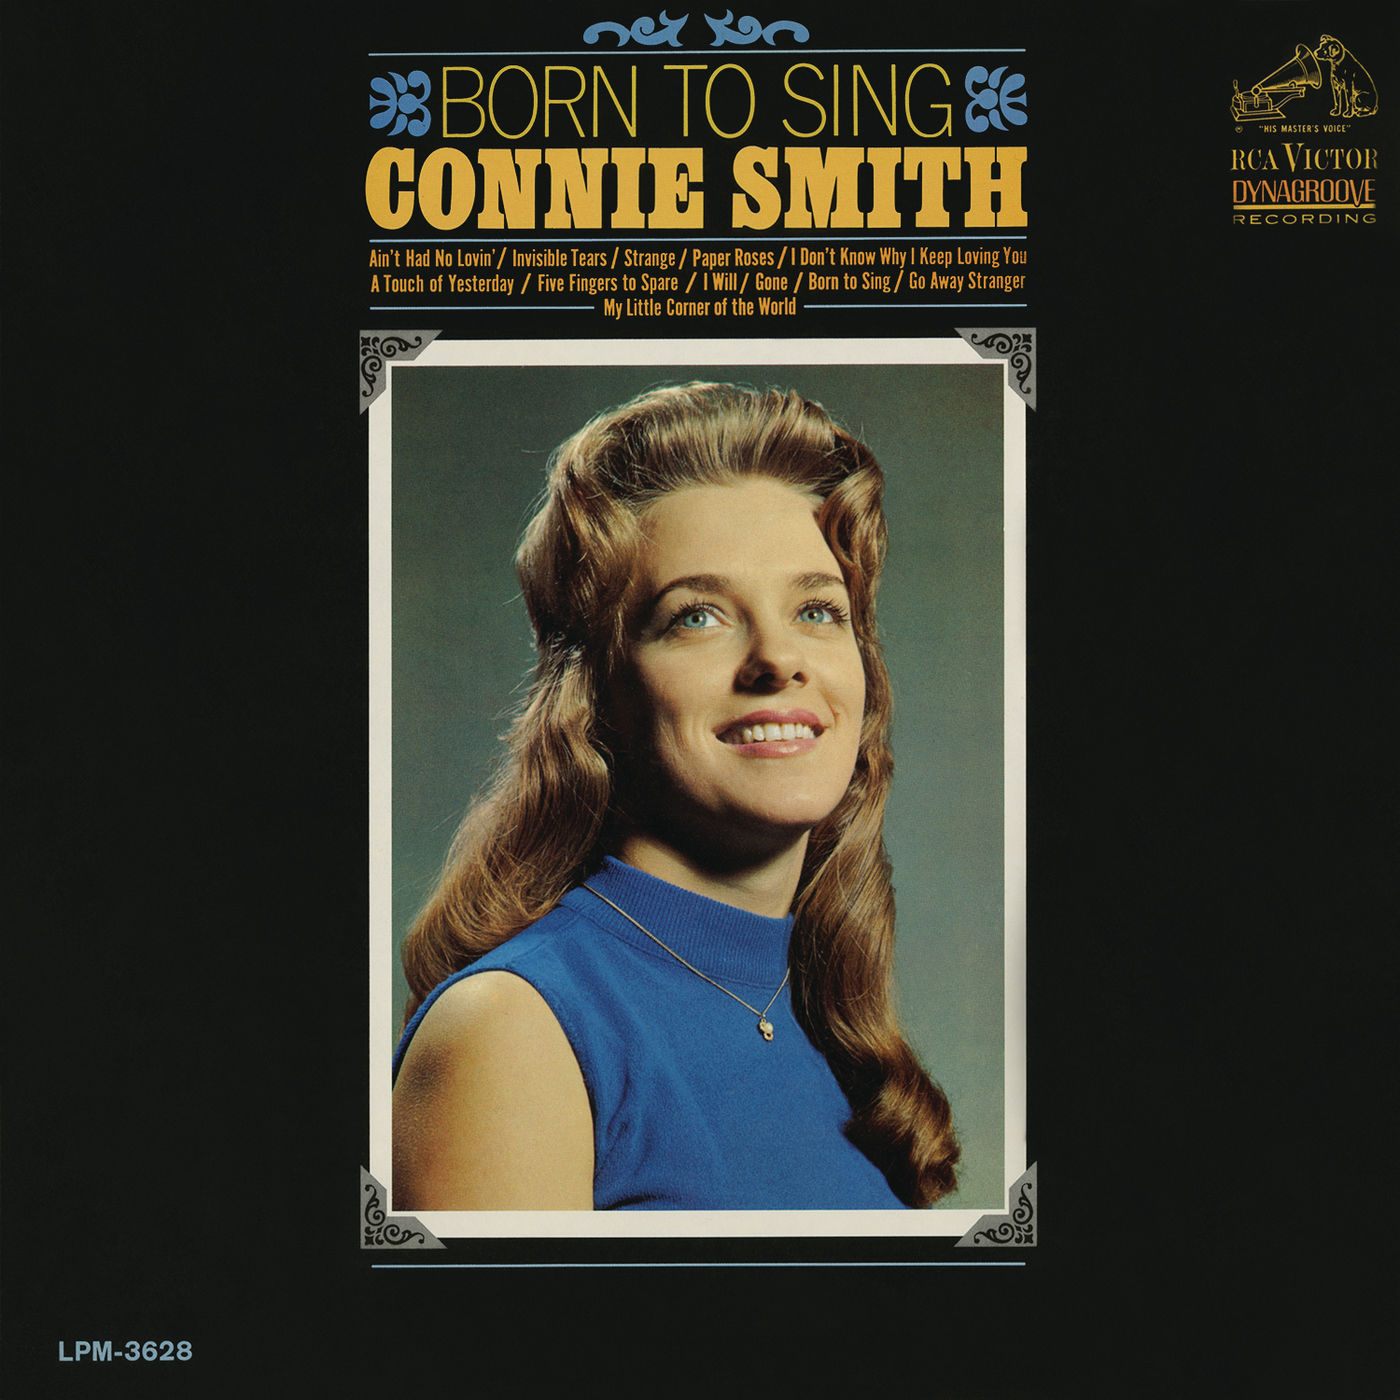 Connie Smith – Born to Sing